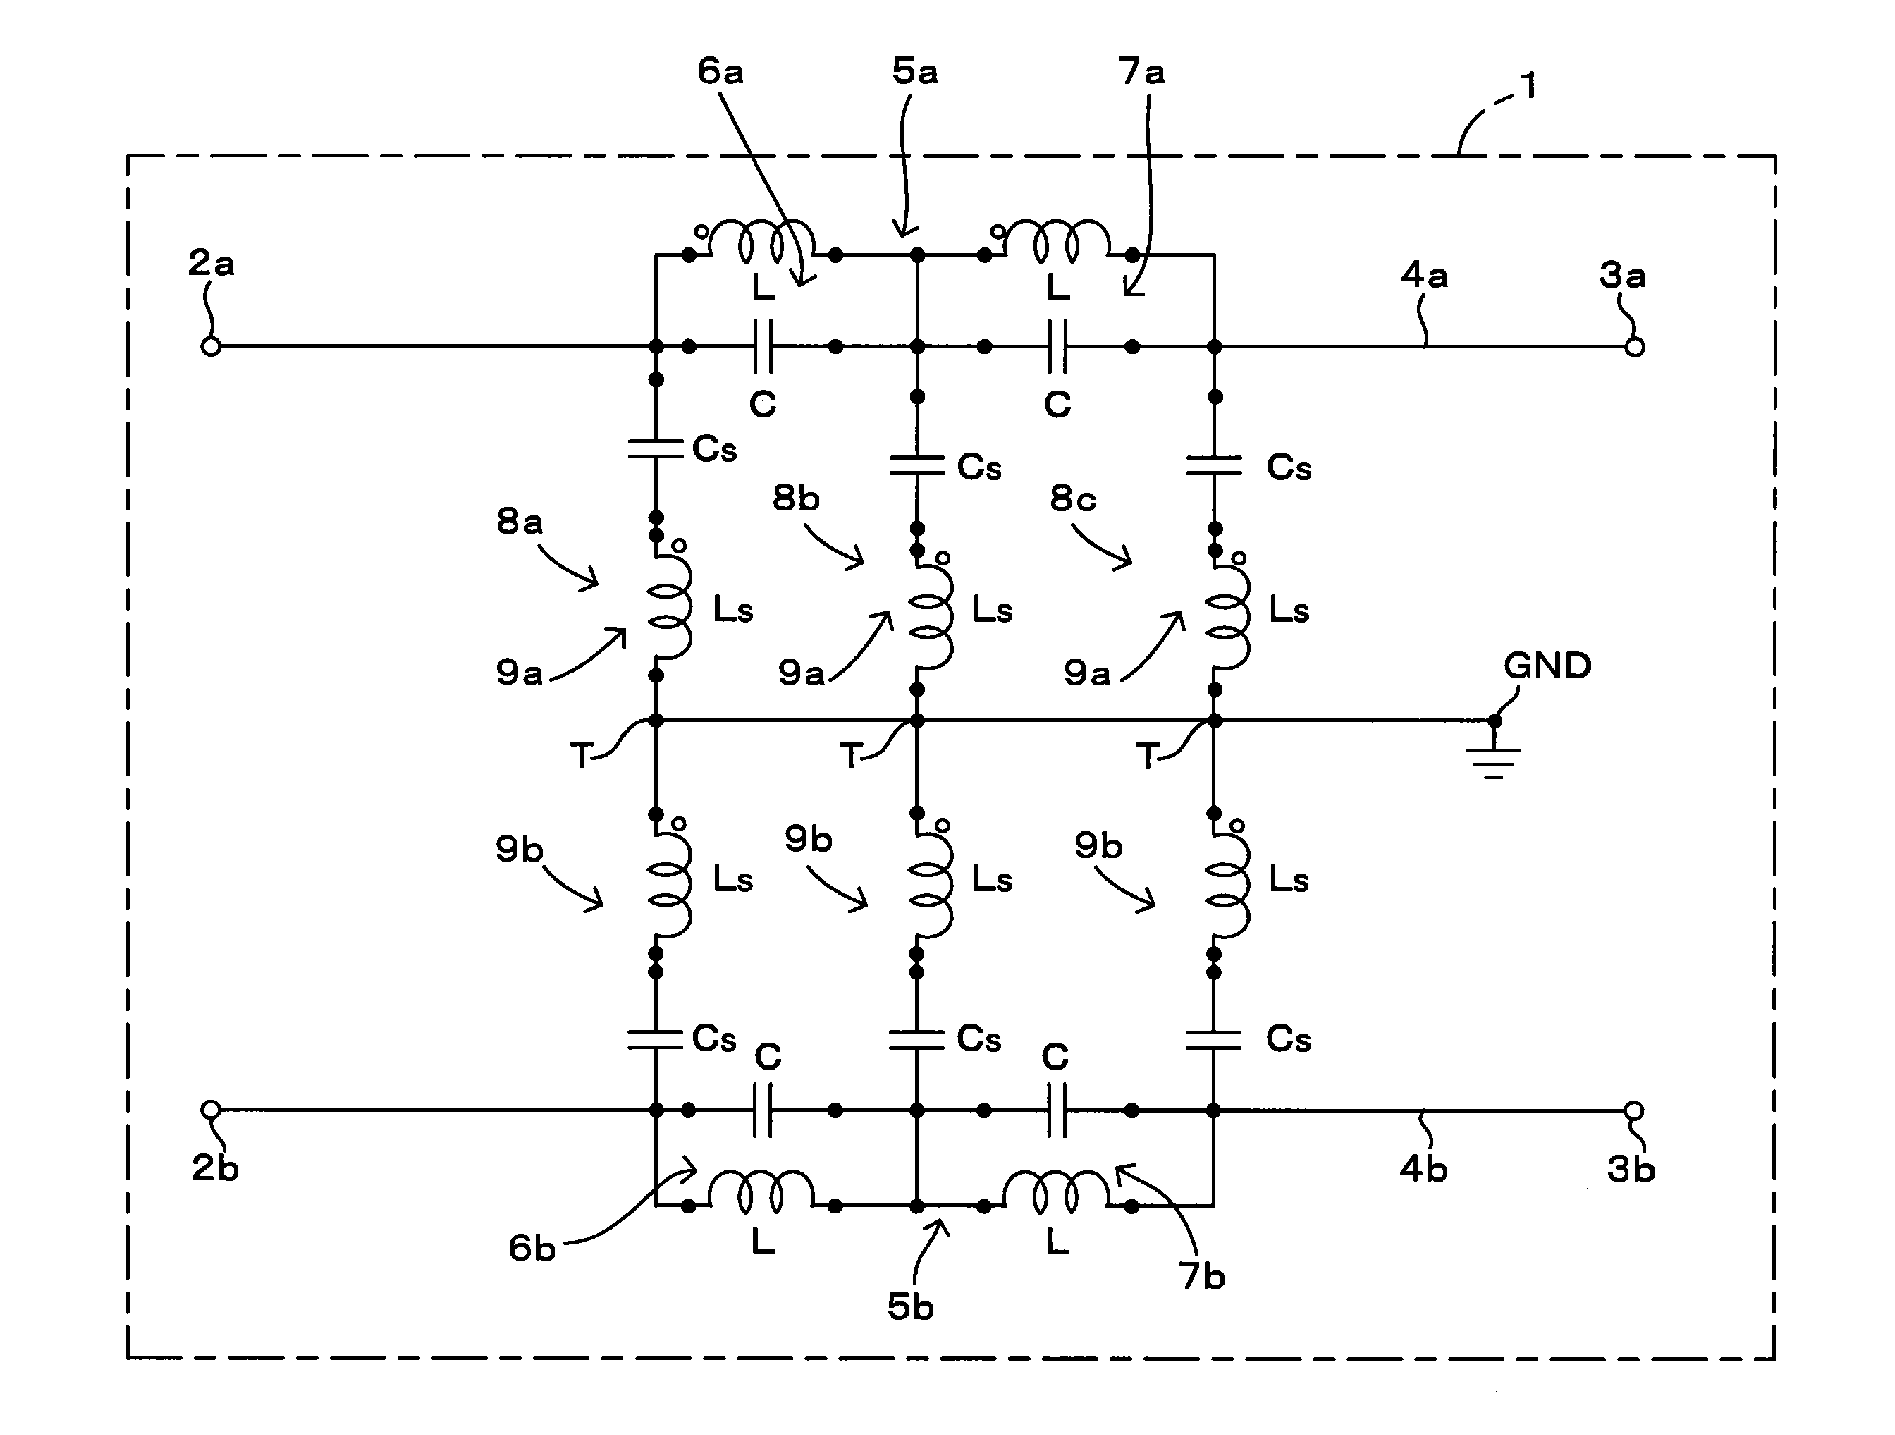 Filter component